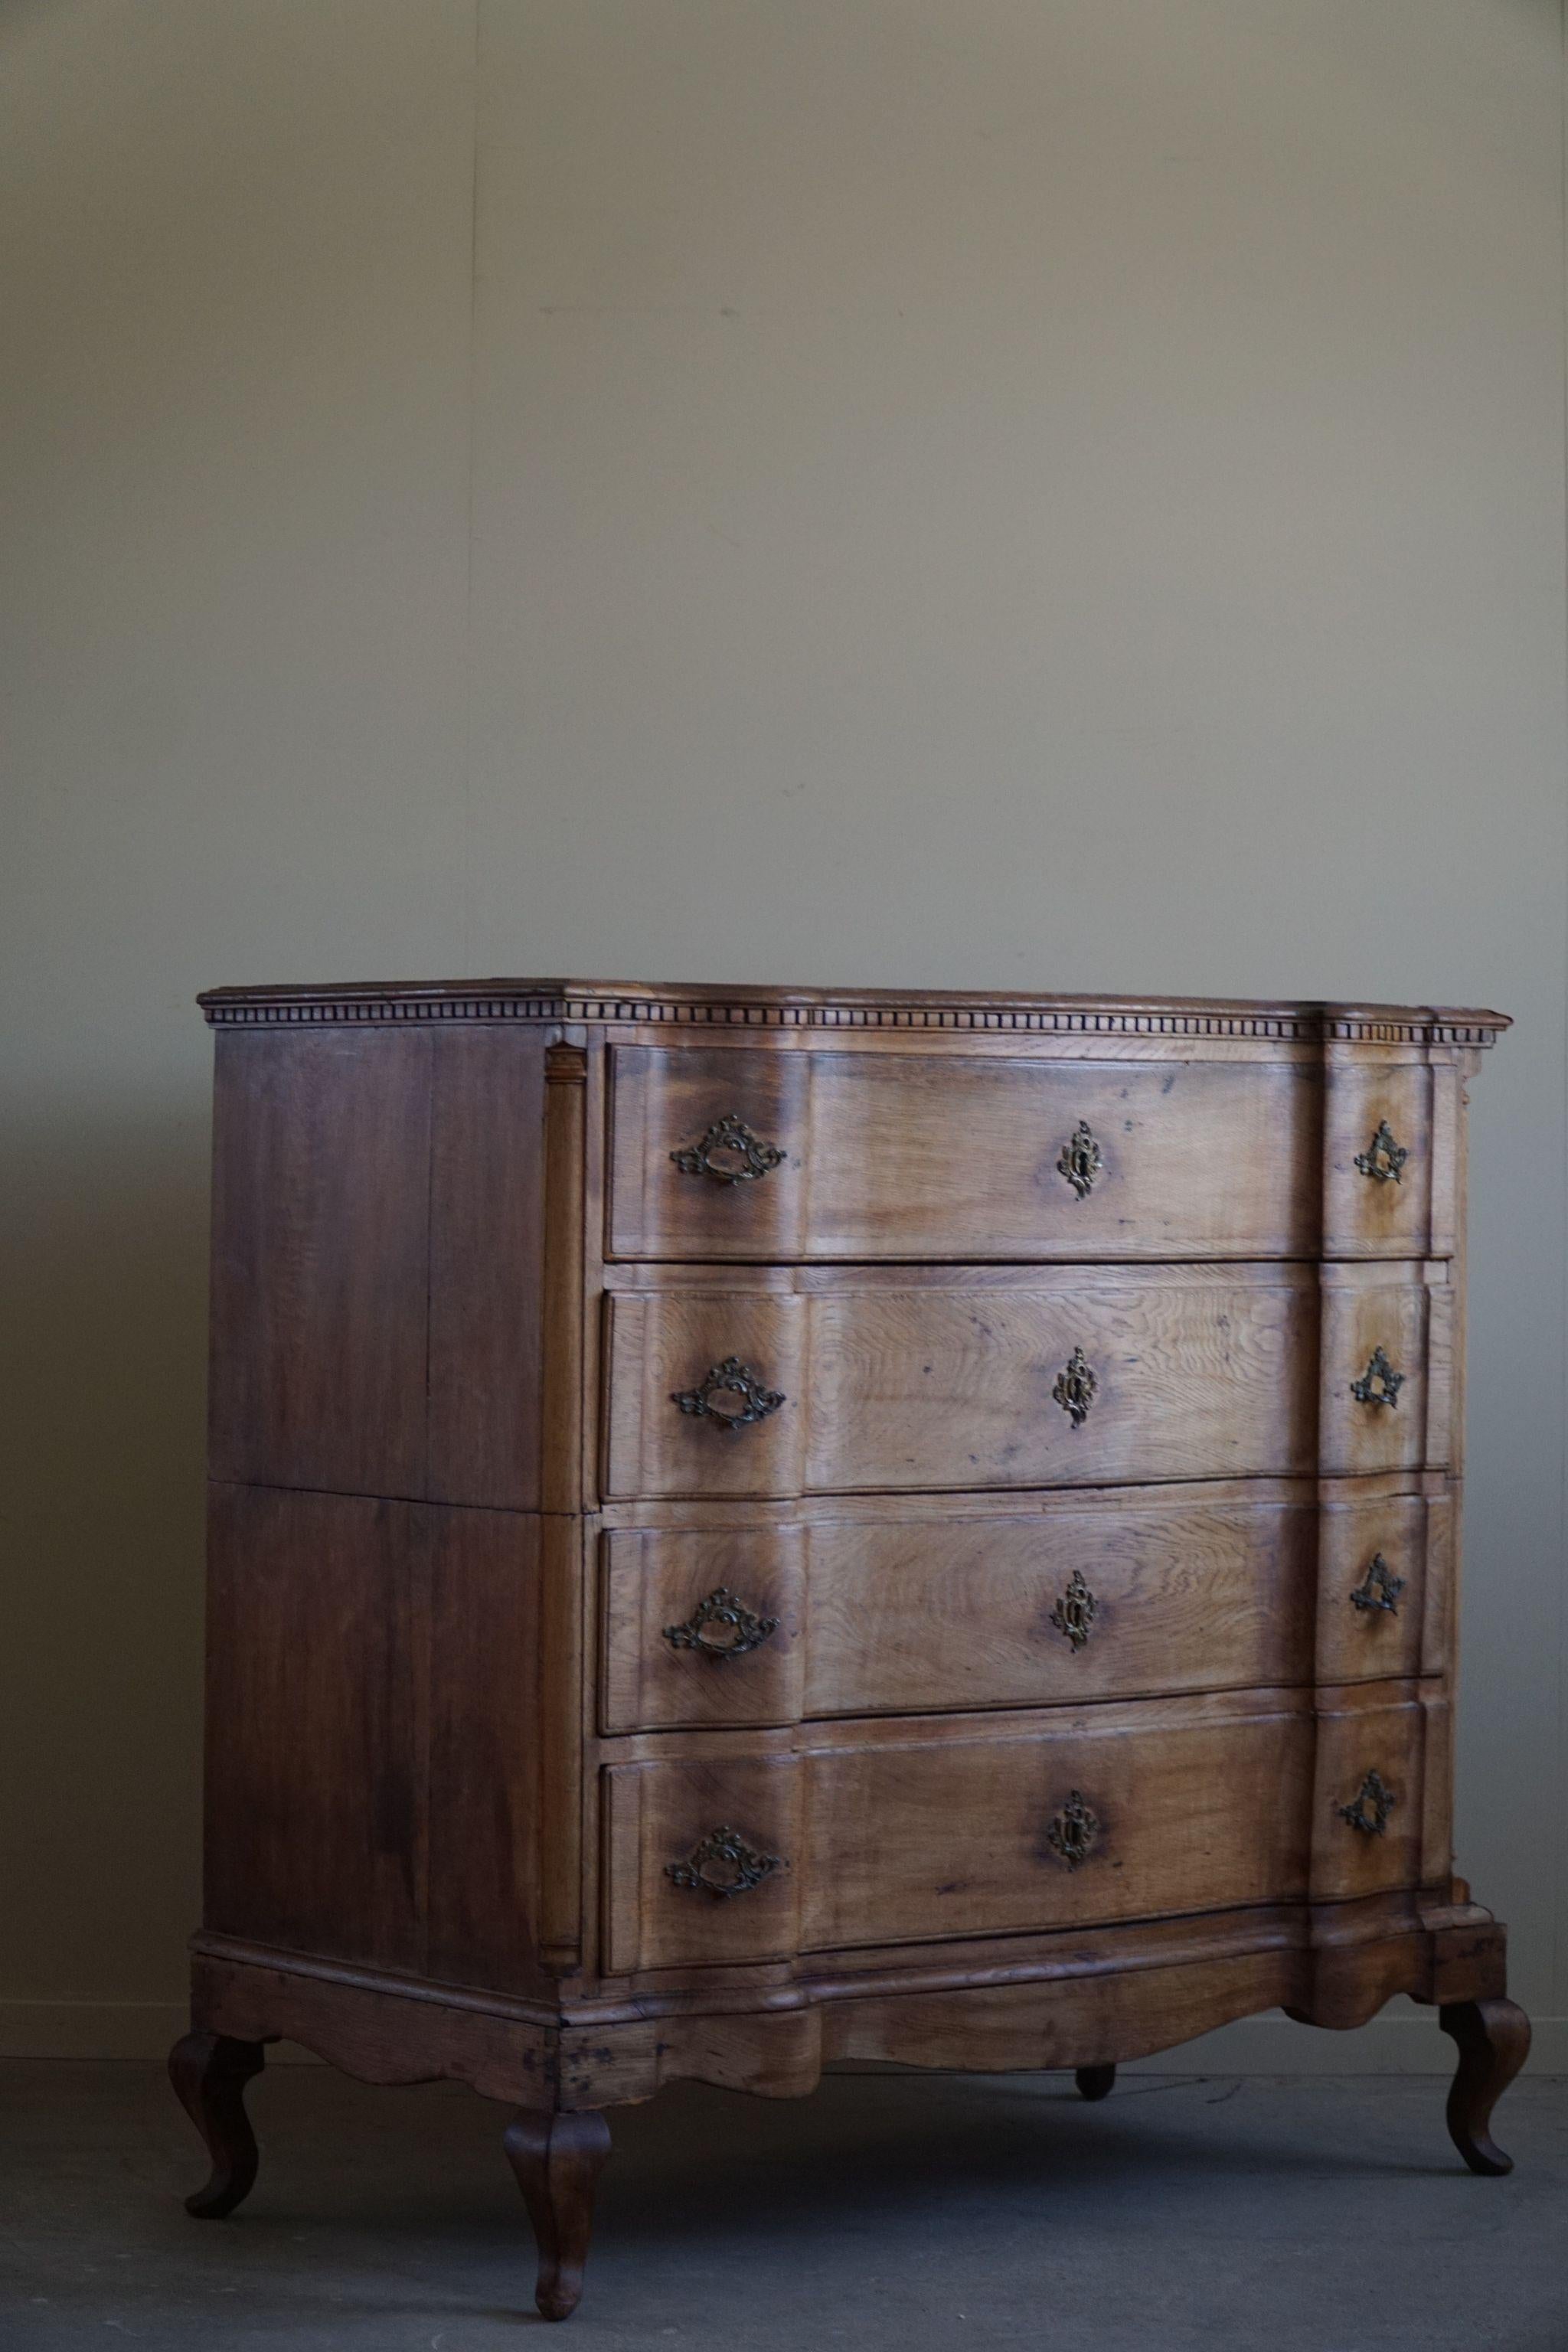 Romantic antique commode / chest of drawers, made by a Danish cabinetmaker in 1790-1810.. Louis XVI. This chest features great curves and carving skills and undoubtedly high quality. Made in solid oak with brass handles.

This beautiful chest of